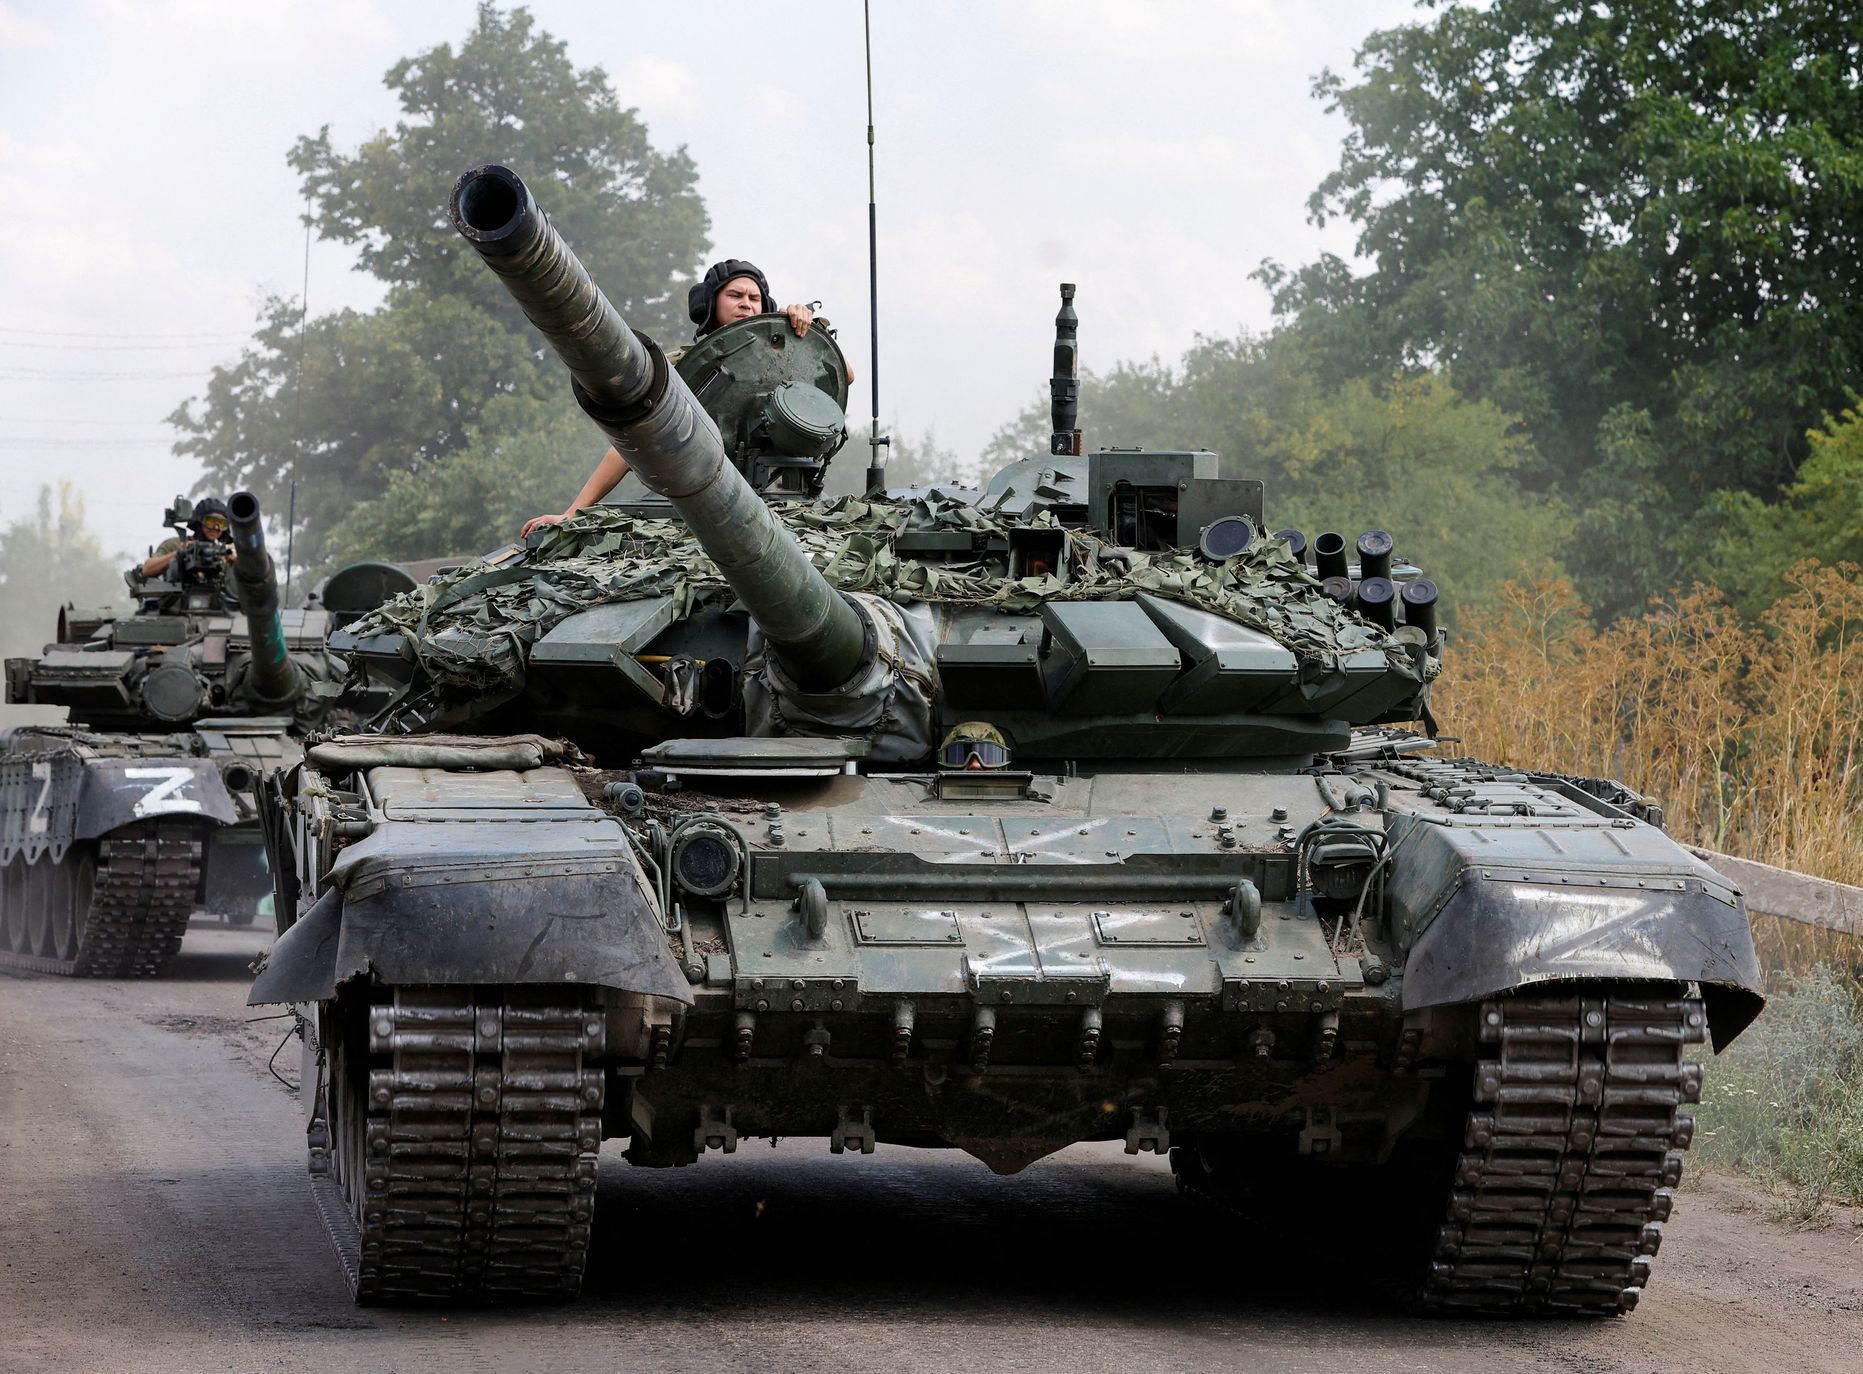 FILE PHOTO: Service members of pro-Russian troops drive tanks in the course of Ukraine-Russia conflict near the settlement of Olenivka